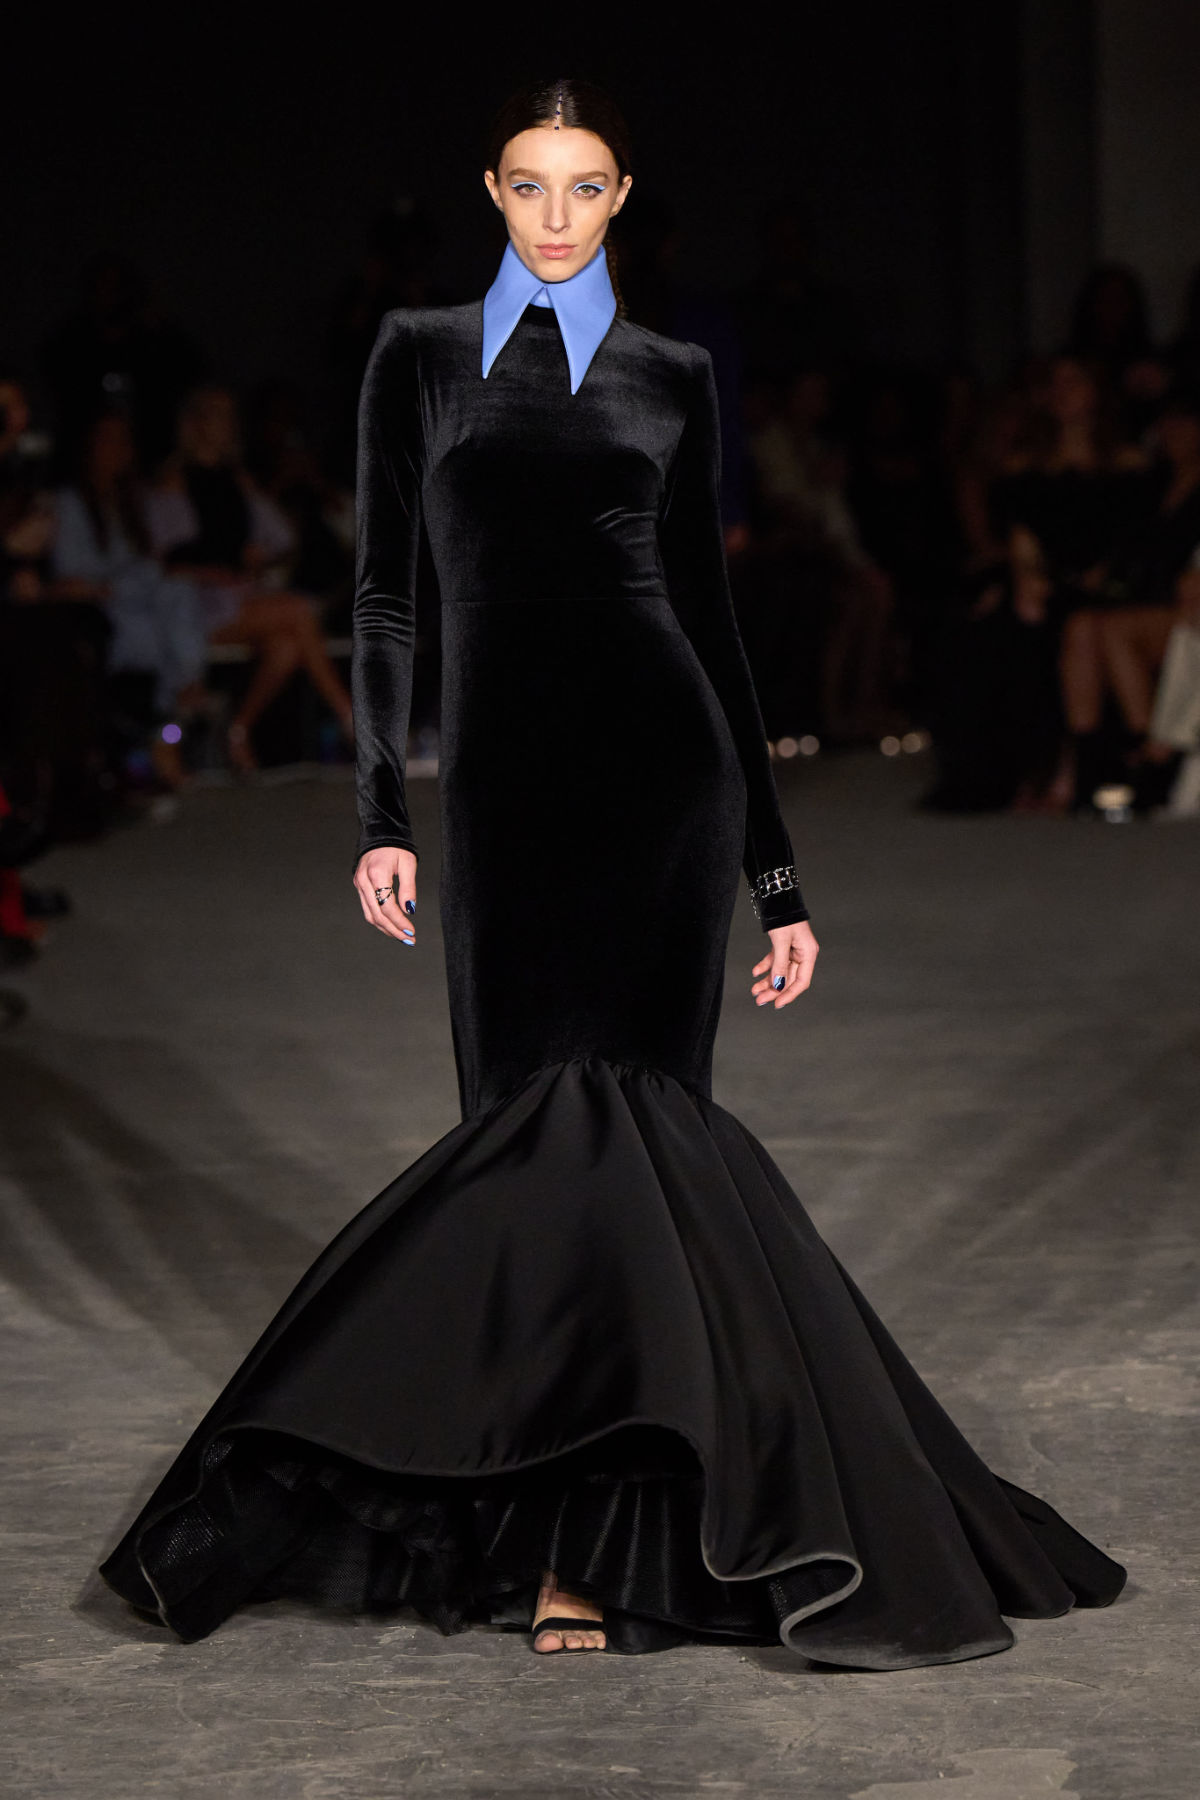 Christian Siriano Presents Its Fall/Winter 2022 Collection